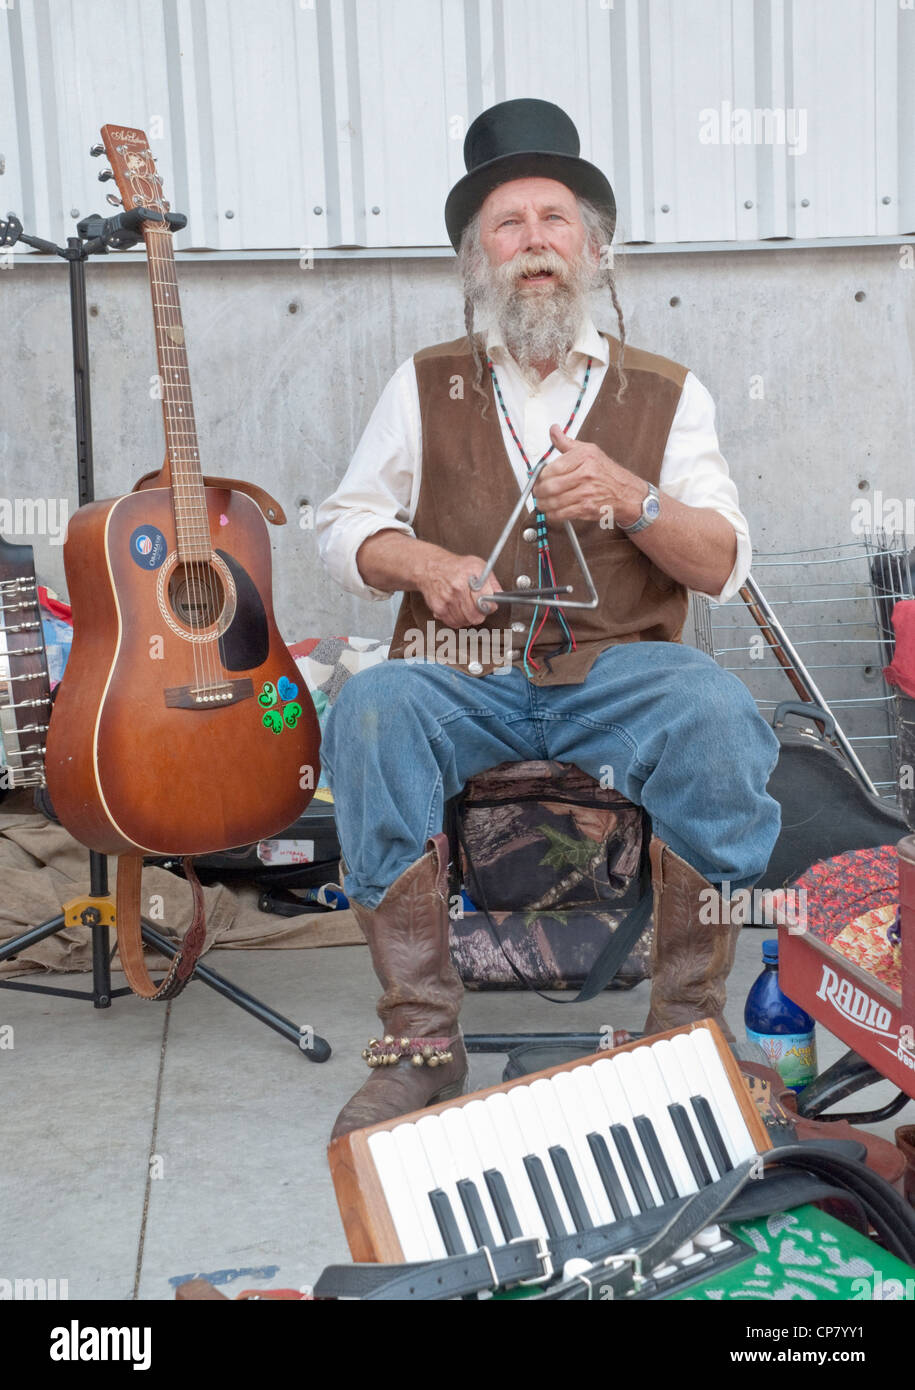 A street musician plays the triangle at the Farmer's Market in Santa Fe, New Mexico. Stock Photo